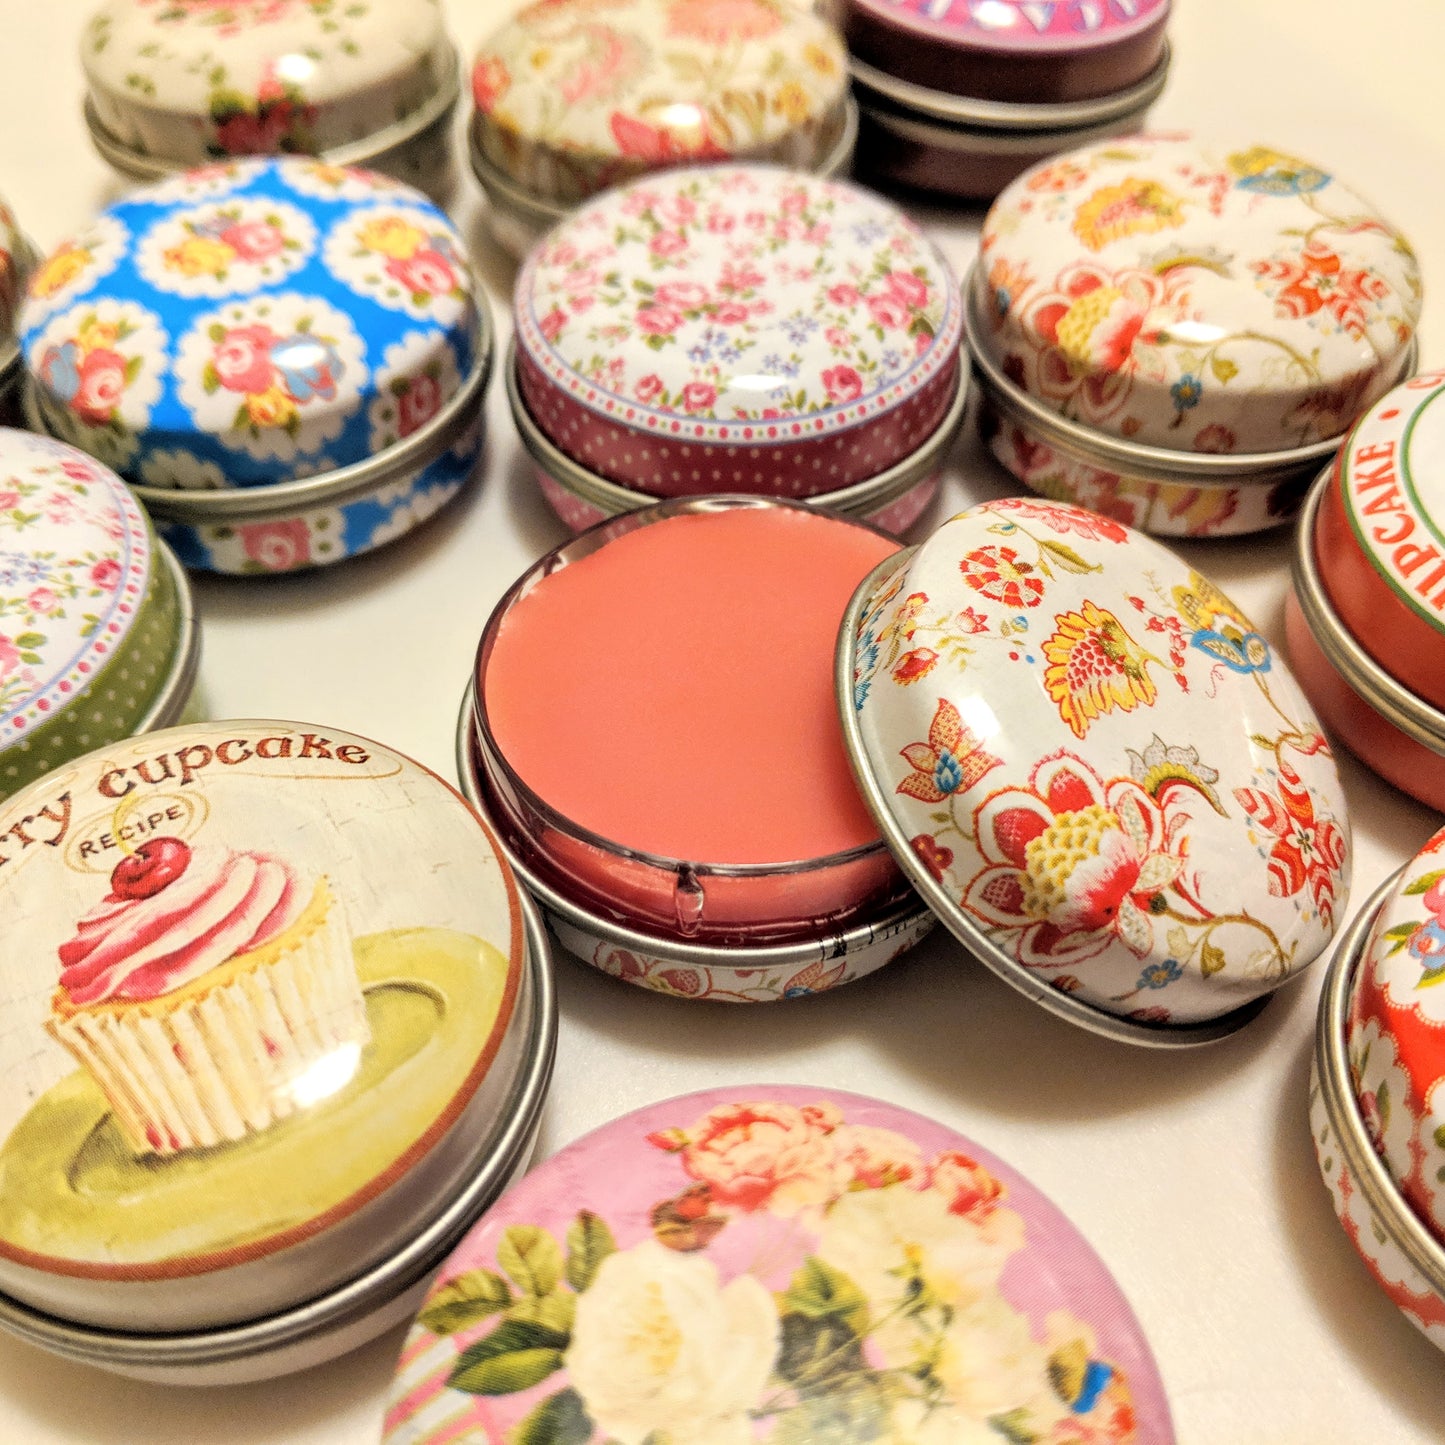 Colorful printed tins filled with light red lip balm. A lip gloss and lip balm in one.